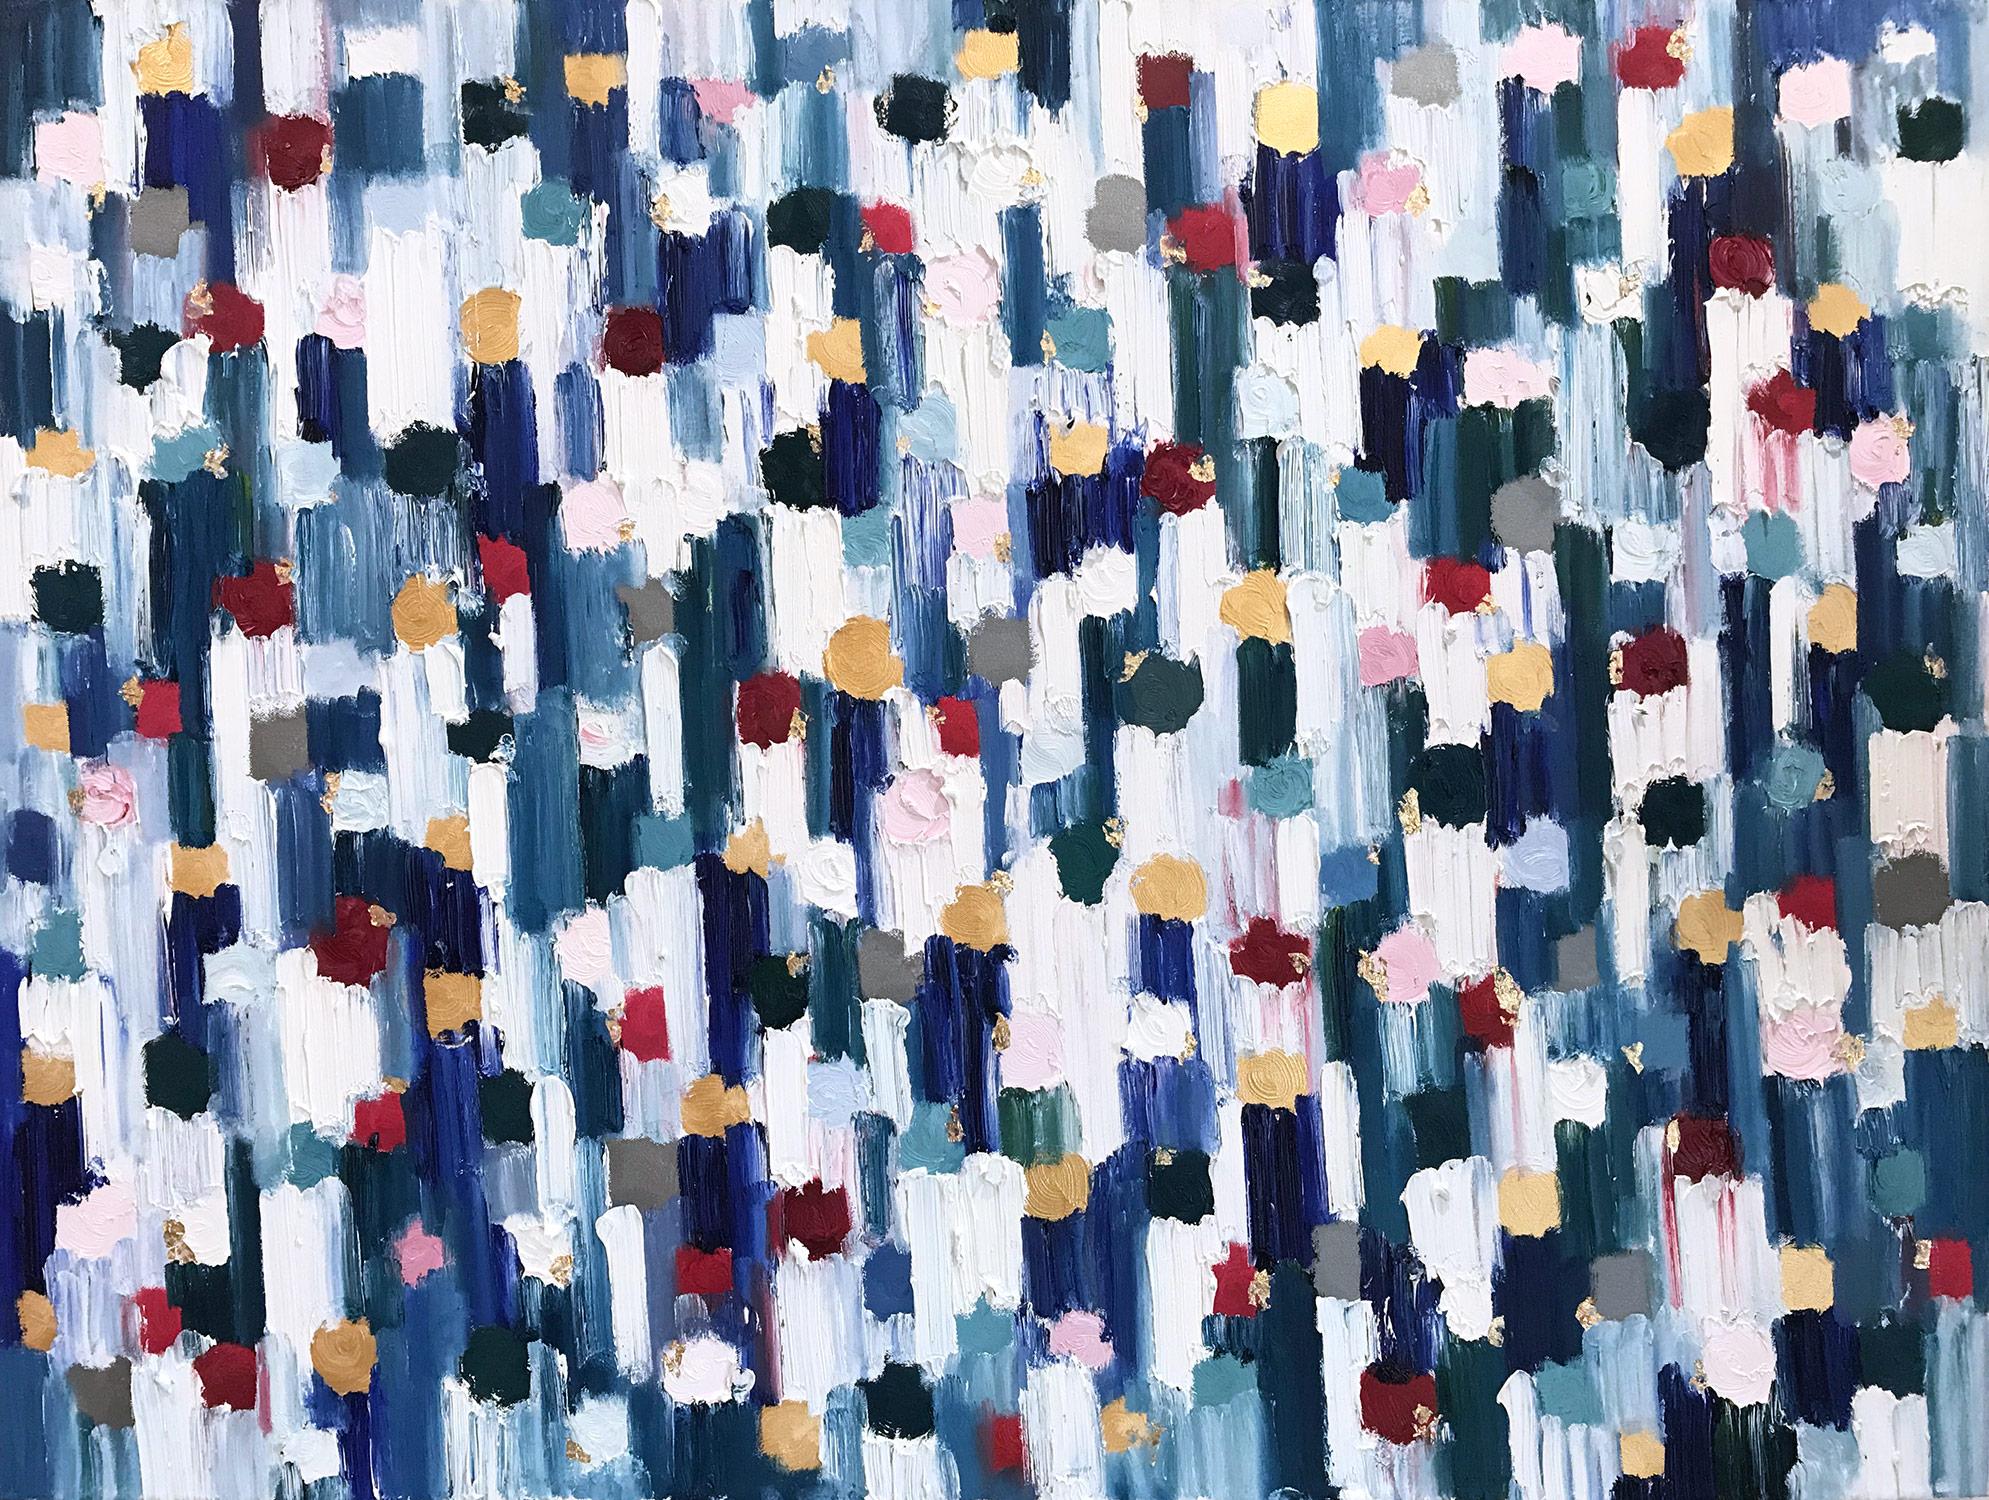 Cindy Shaoul Abstract Painting – "Dripping Dots - Province Paris" Colorful Abstract Oil Painting on Canvas